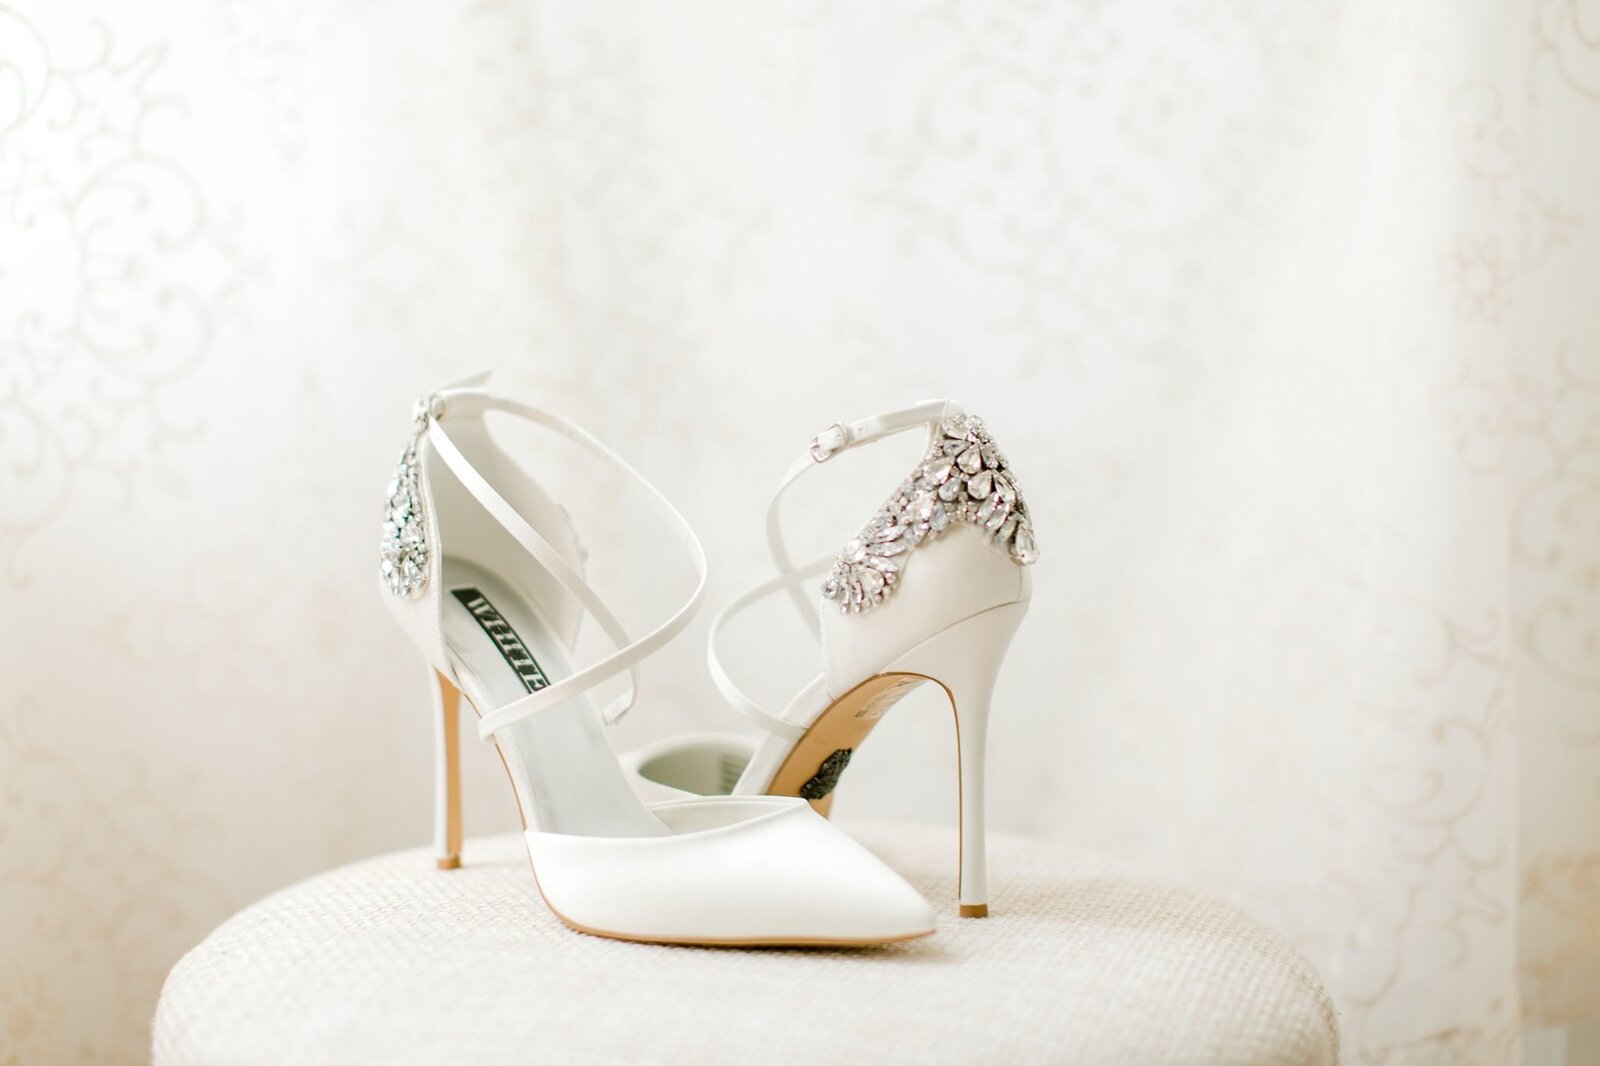 wedding shoes, wedding hills, whote shoes for wedding wedding photography by local chicago wedding photographer bozena voytko, wedding photographers, best chicago wedding photographer, chicago Il wedding photographer